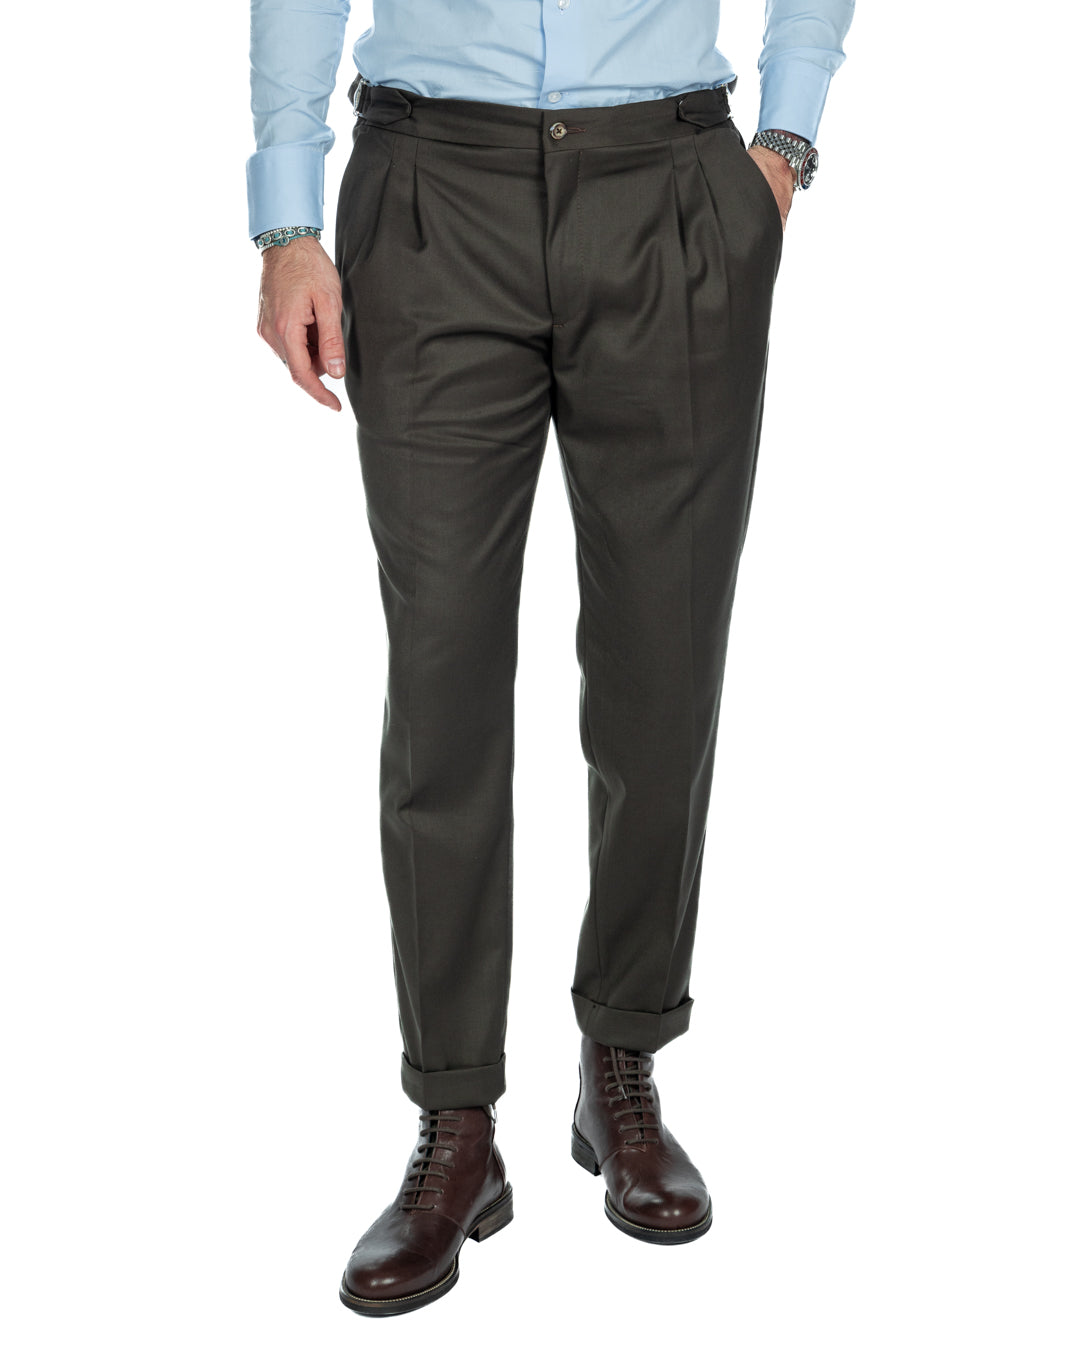 Otranto - green trousers with buckles and pleats